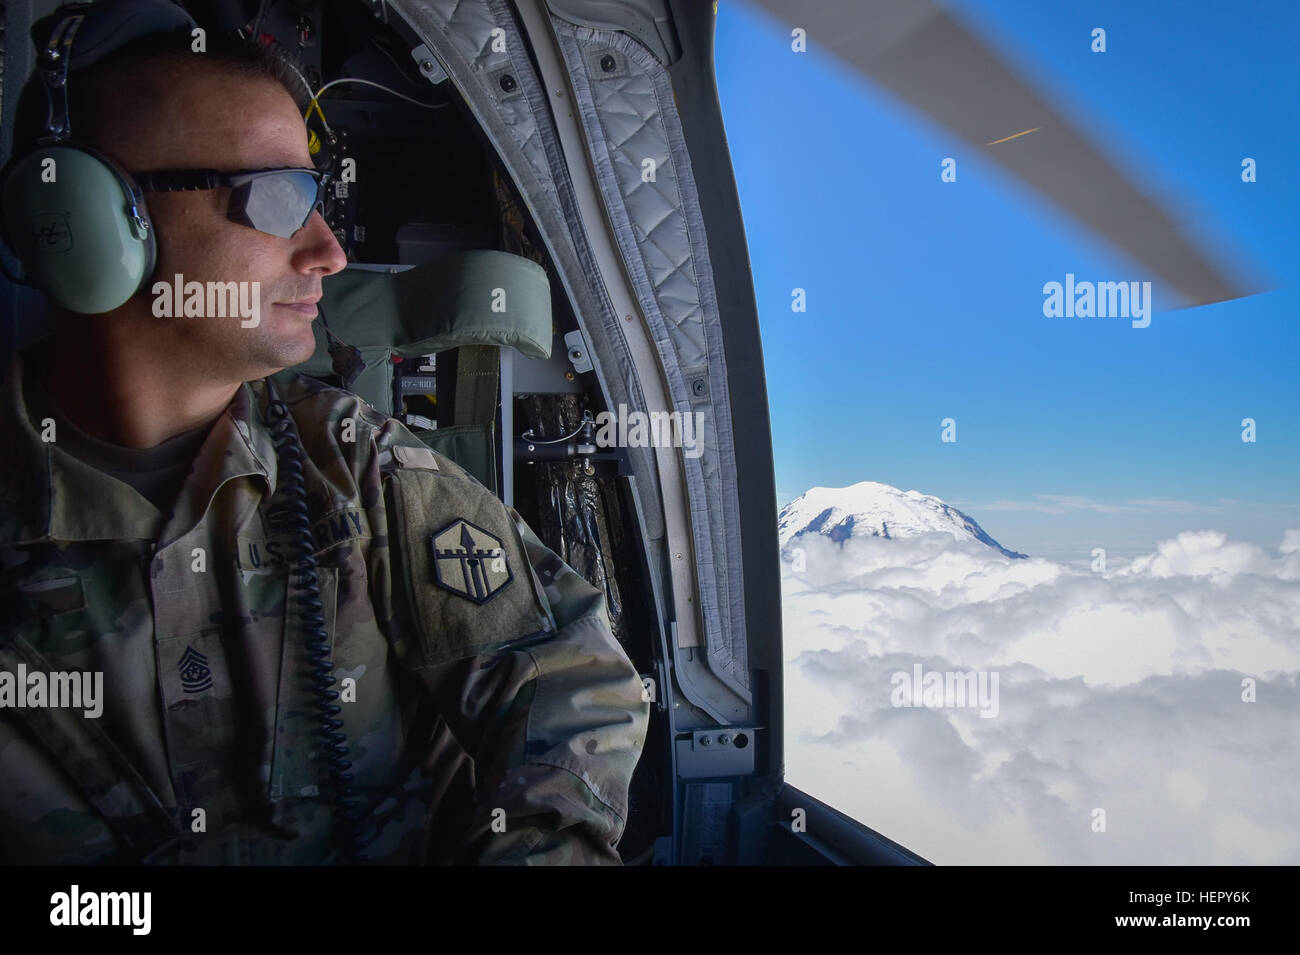 U.S. Army Reserve Command Sgt. Maj. Thomas C. Perry, 301st Maneuver Enhancement Brigade (MEB) command sergeant major, enjoys the view from a CH-47 Chinook, July 22, 2016, near the top of Mount Rainier, Washington.  Perry along with other U.S. Army Reserve soldiers participated in a flyover of Mount Rainier, Joint Base Lewis-McChord and Yakima Training Center by the U.S. Army Reserve 1-214th General Support Aviation Battalion, Bravo Company,  based out of Joint Base Lewis-McChord.  (U.S. Army photo by Master Sgt. Marisol Walker/Released) Enjoying the view 160722-A-EK876-048 Stock Photo